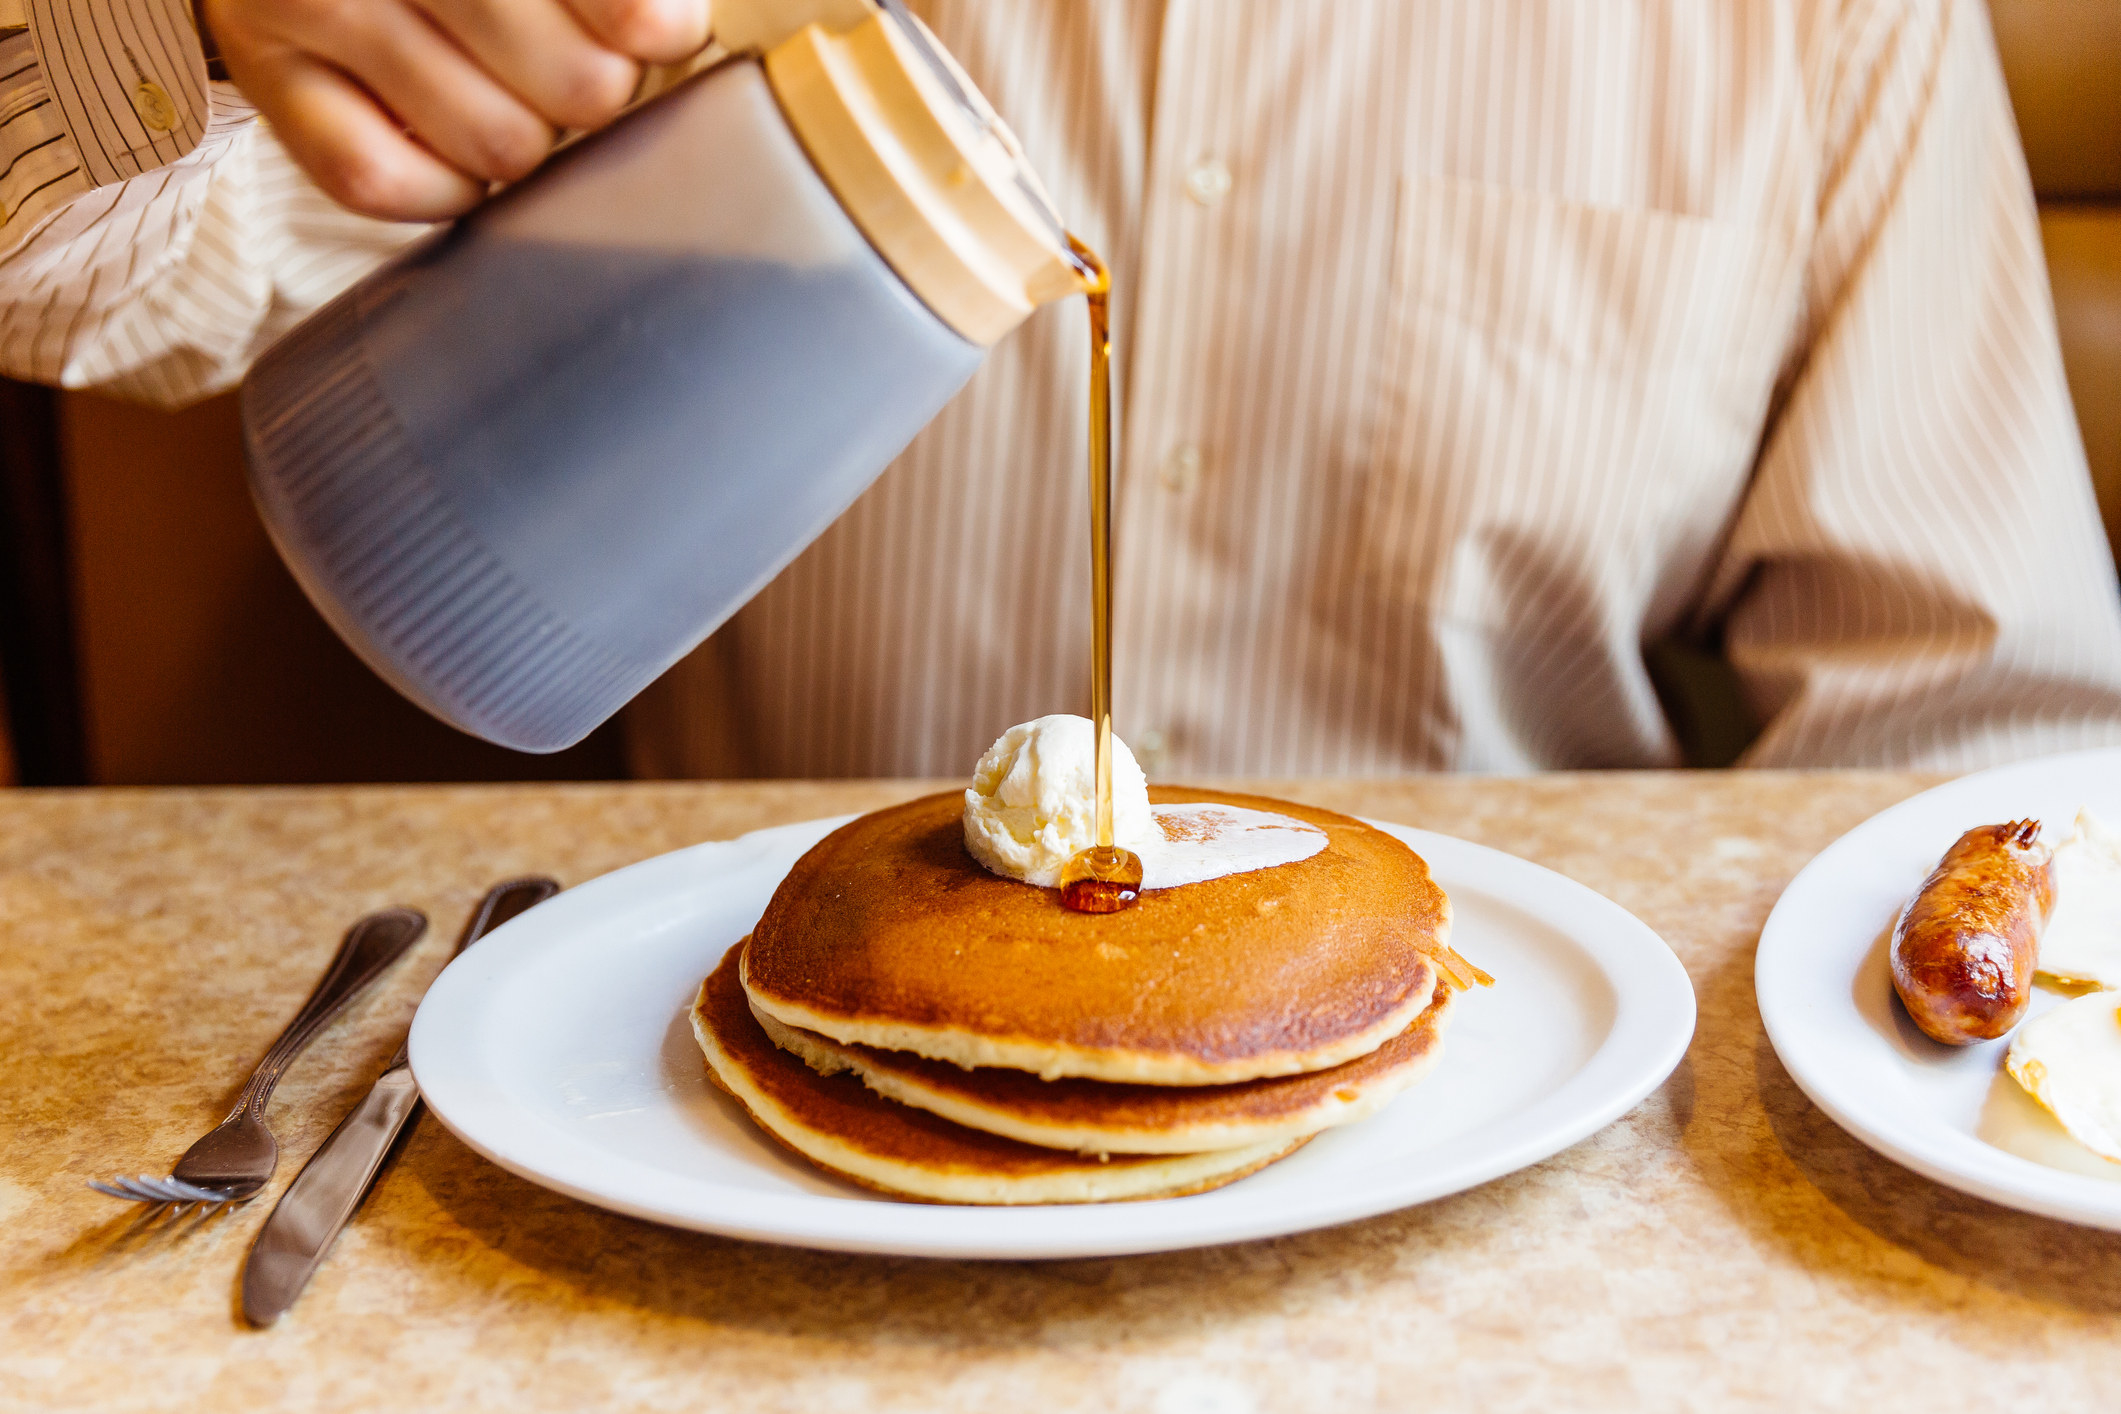 Pouring maple syrup onto a stack of pancakes.